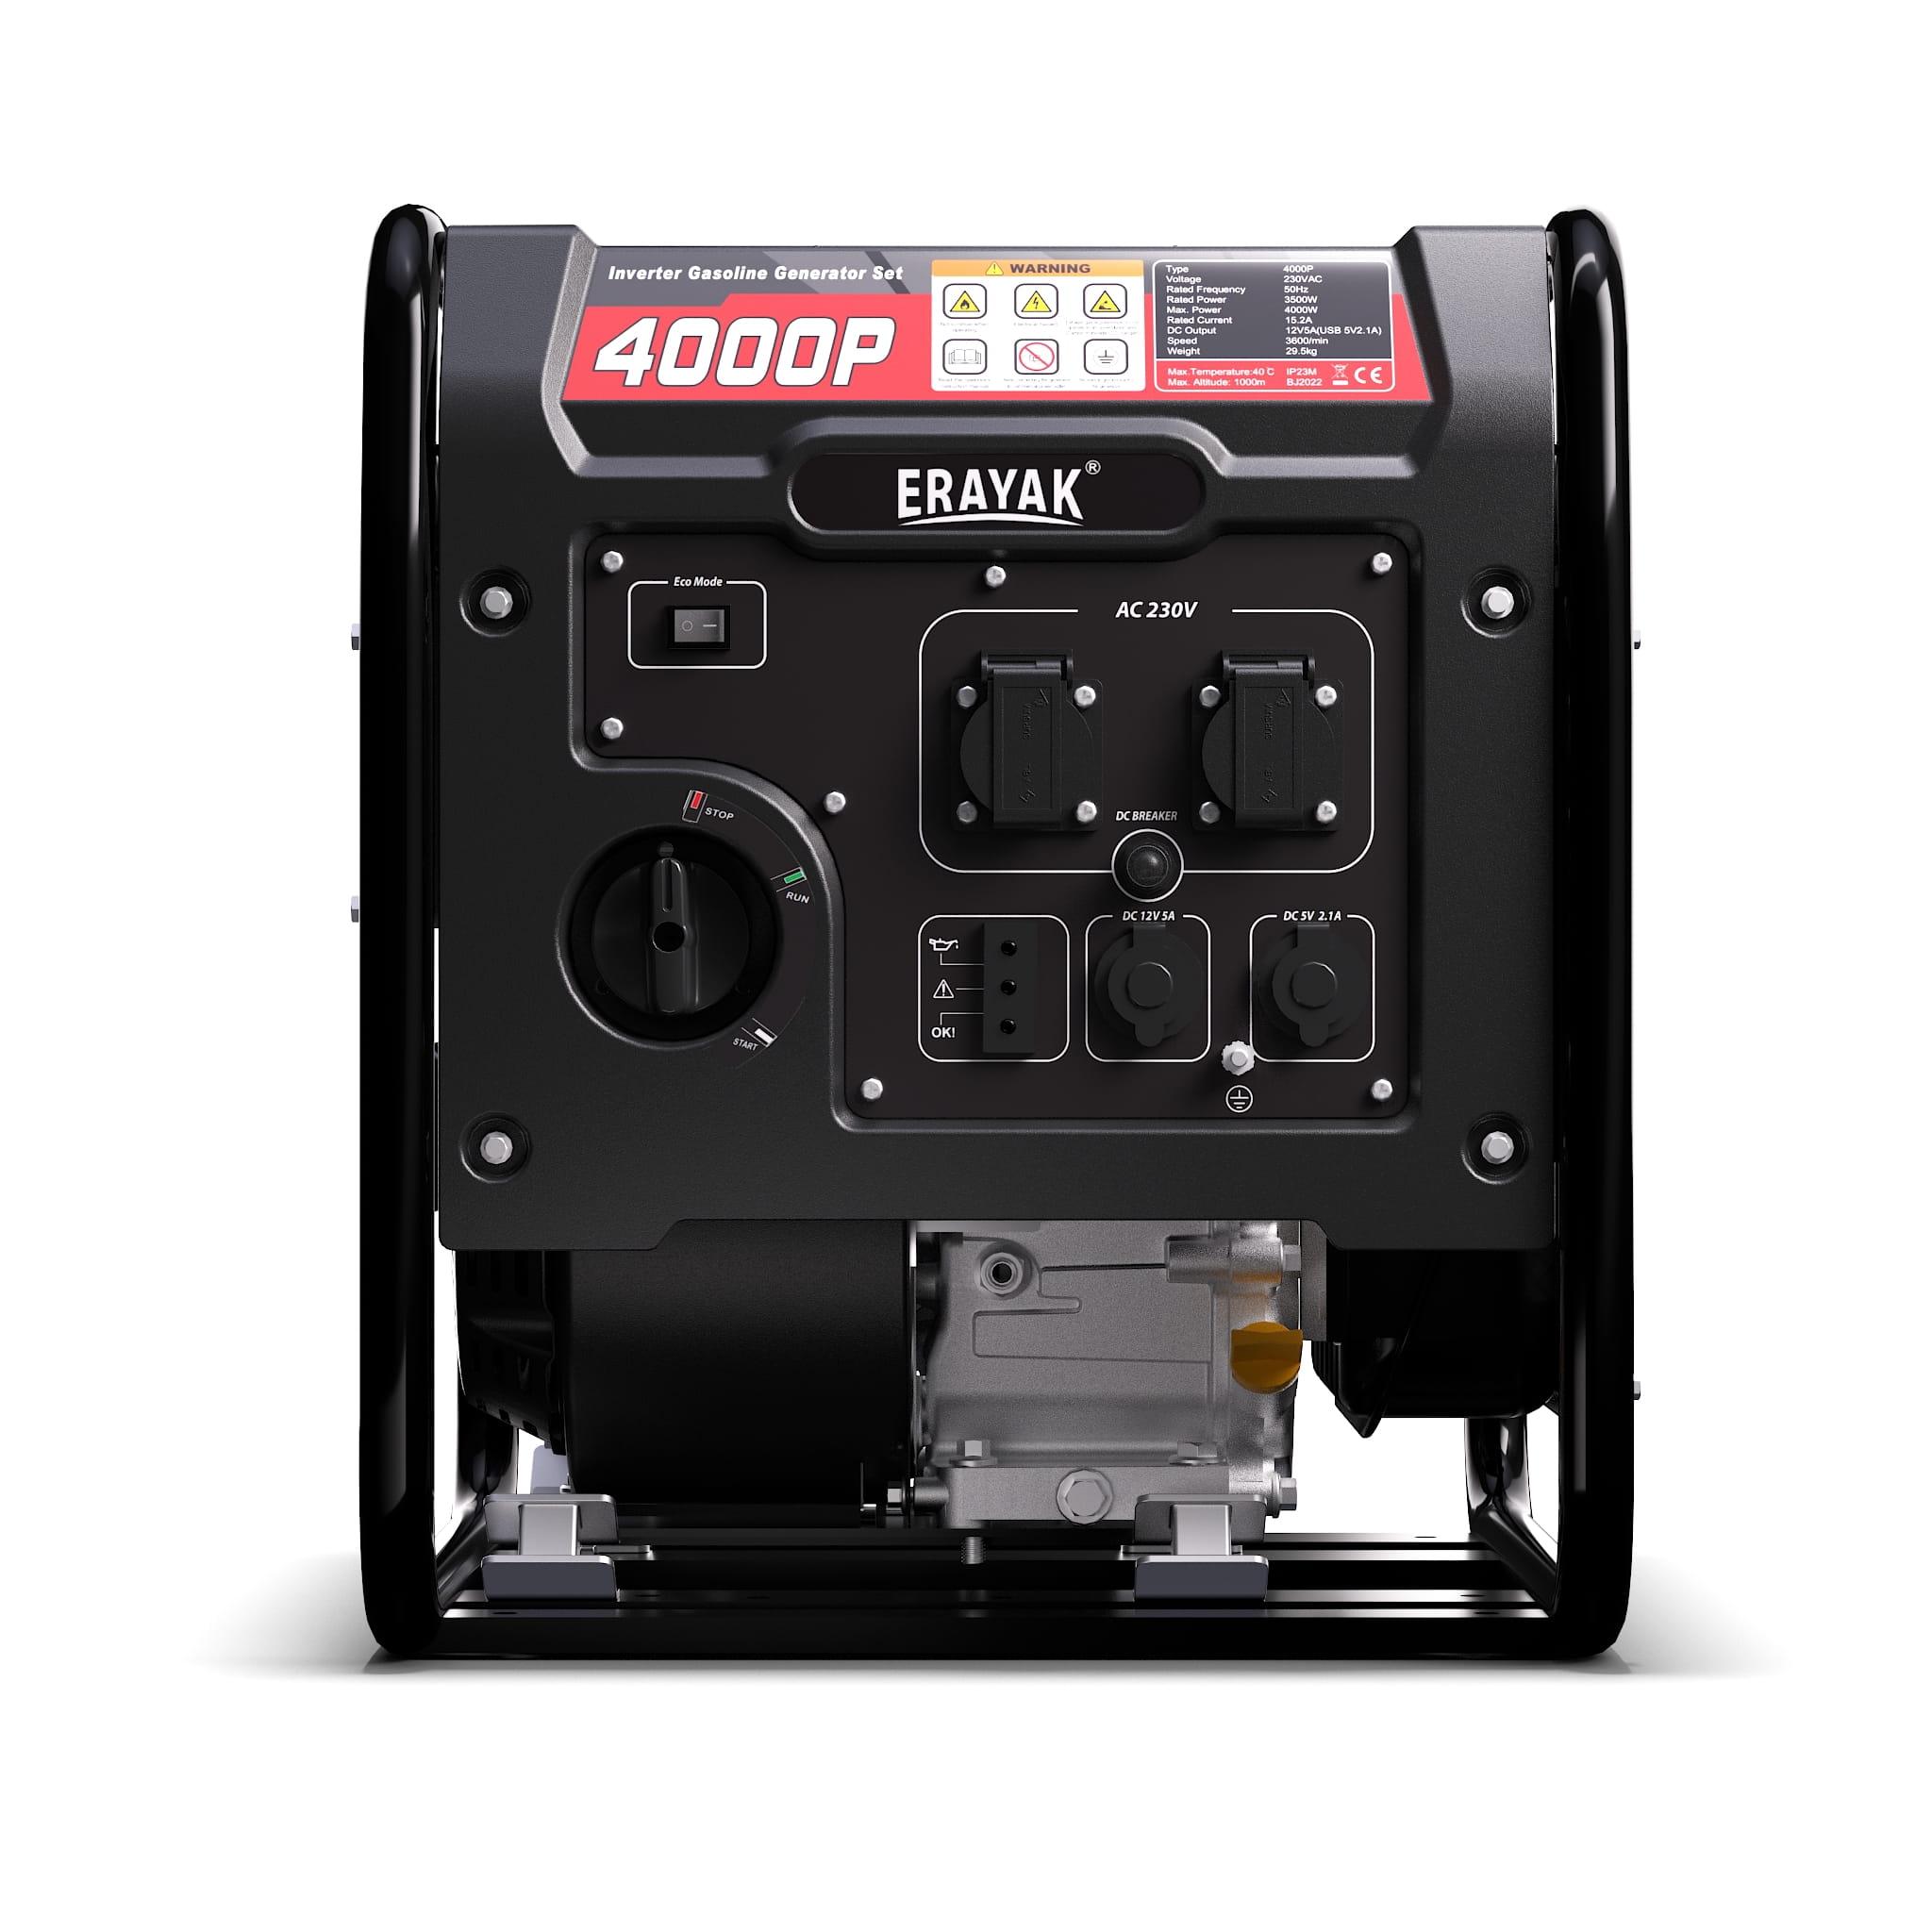 EYG4000P Standby Inverter Generator 4200W - Ideal for Camping & Home Backup Power - Erayak